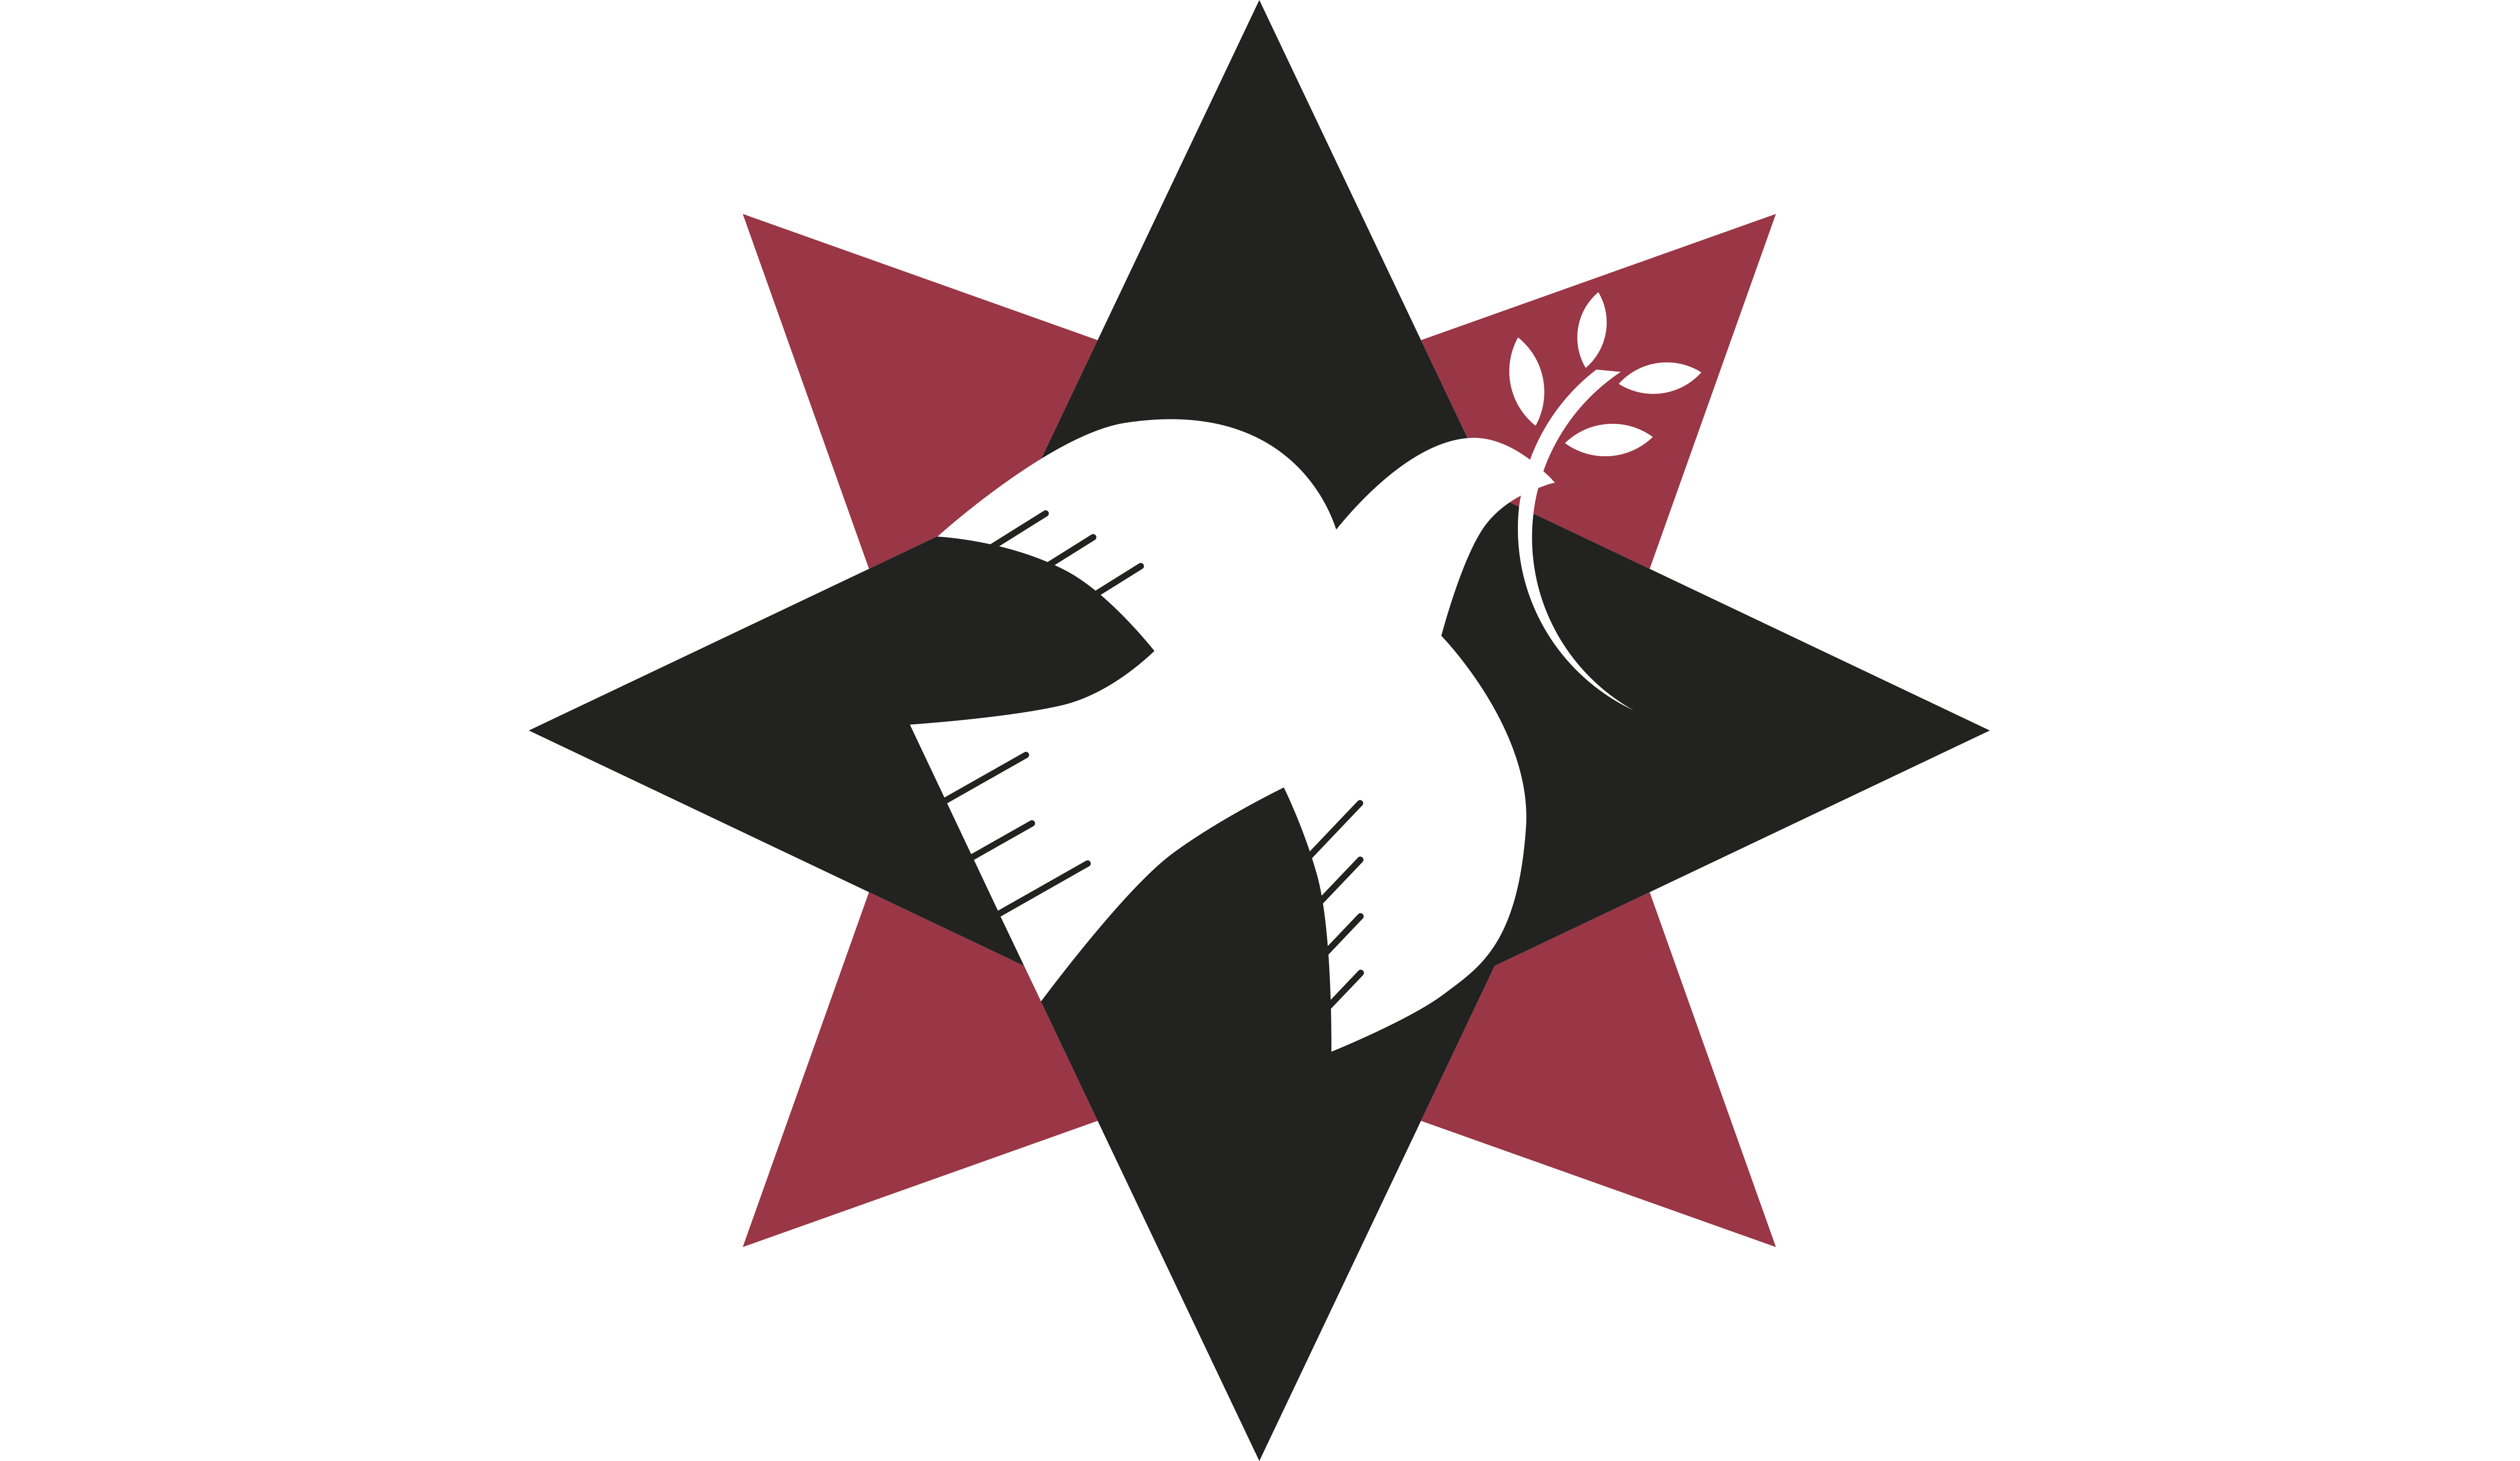 Quaker Peace & Social Witness logo: 8-point star with a dove